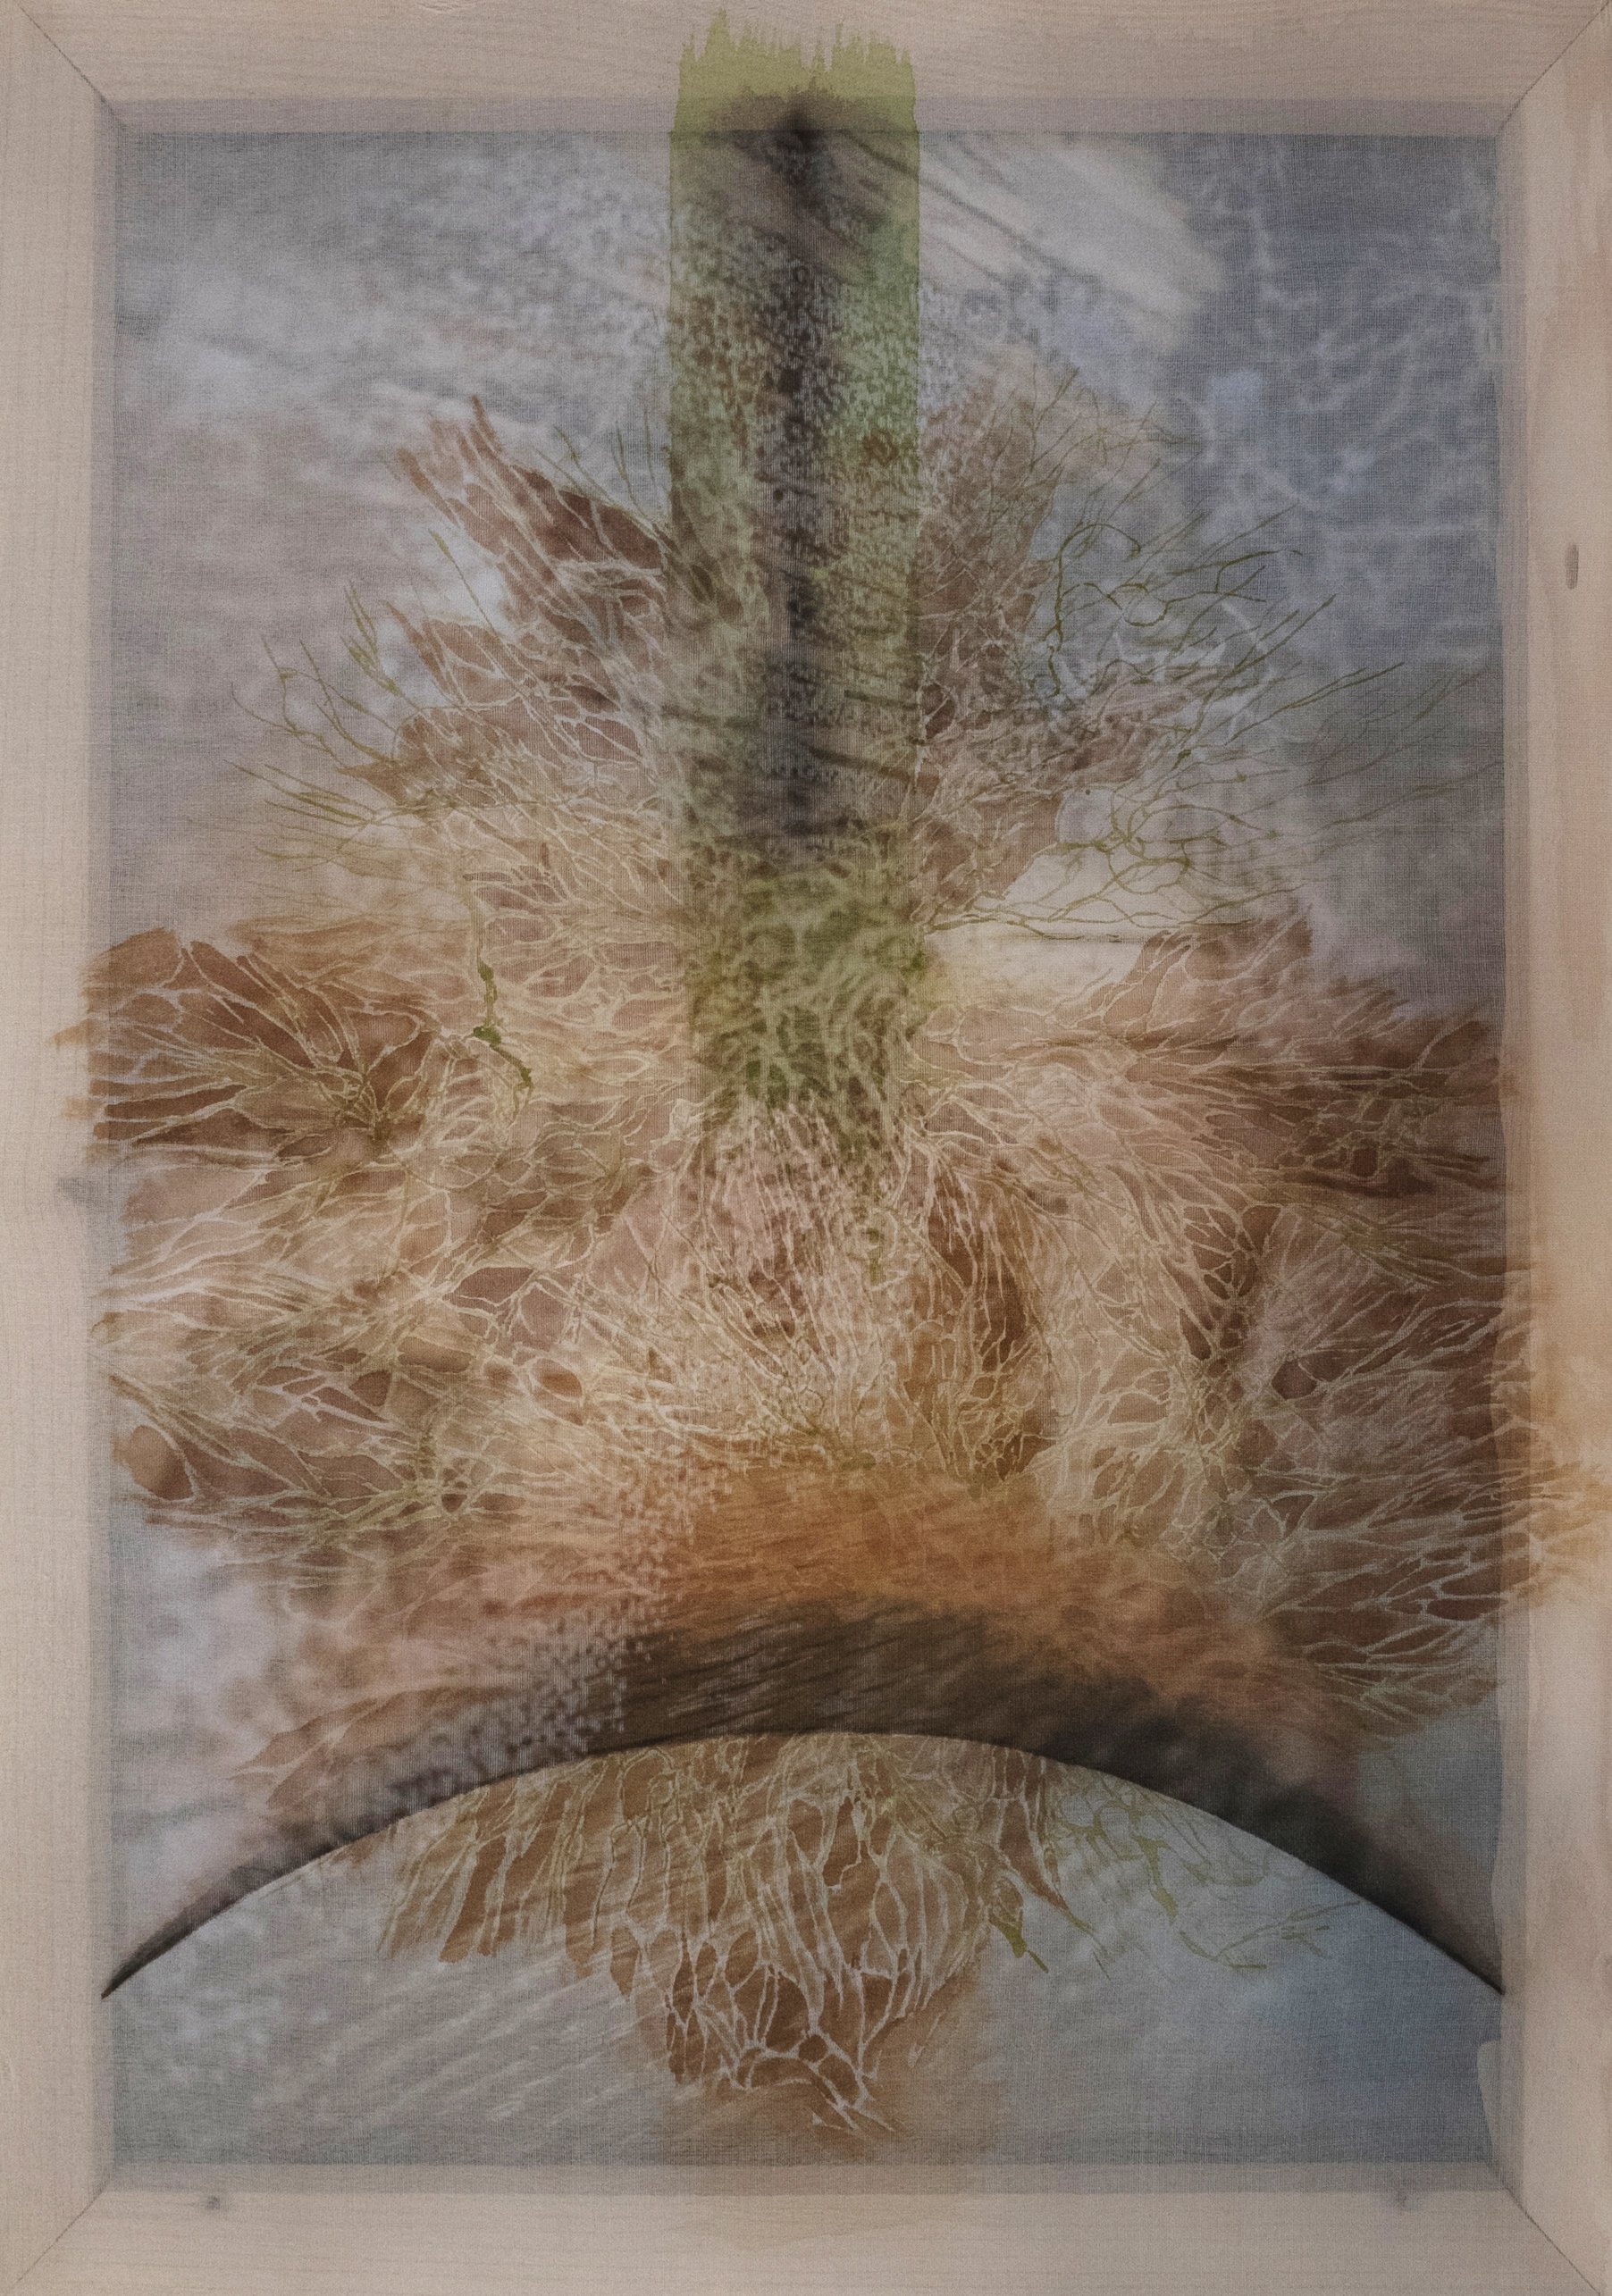    Circulations 2  . 2021. Ink and watercolor painting on silk, inkjet pigment print on archival paper.  50 x 35 x 3.5 cm   